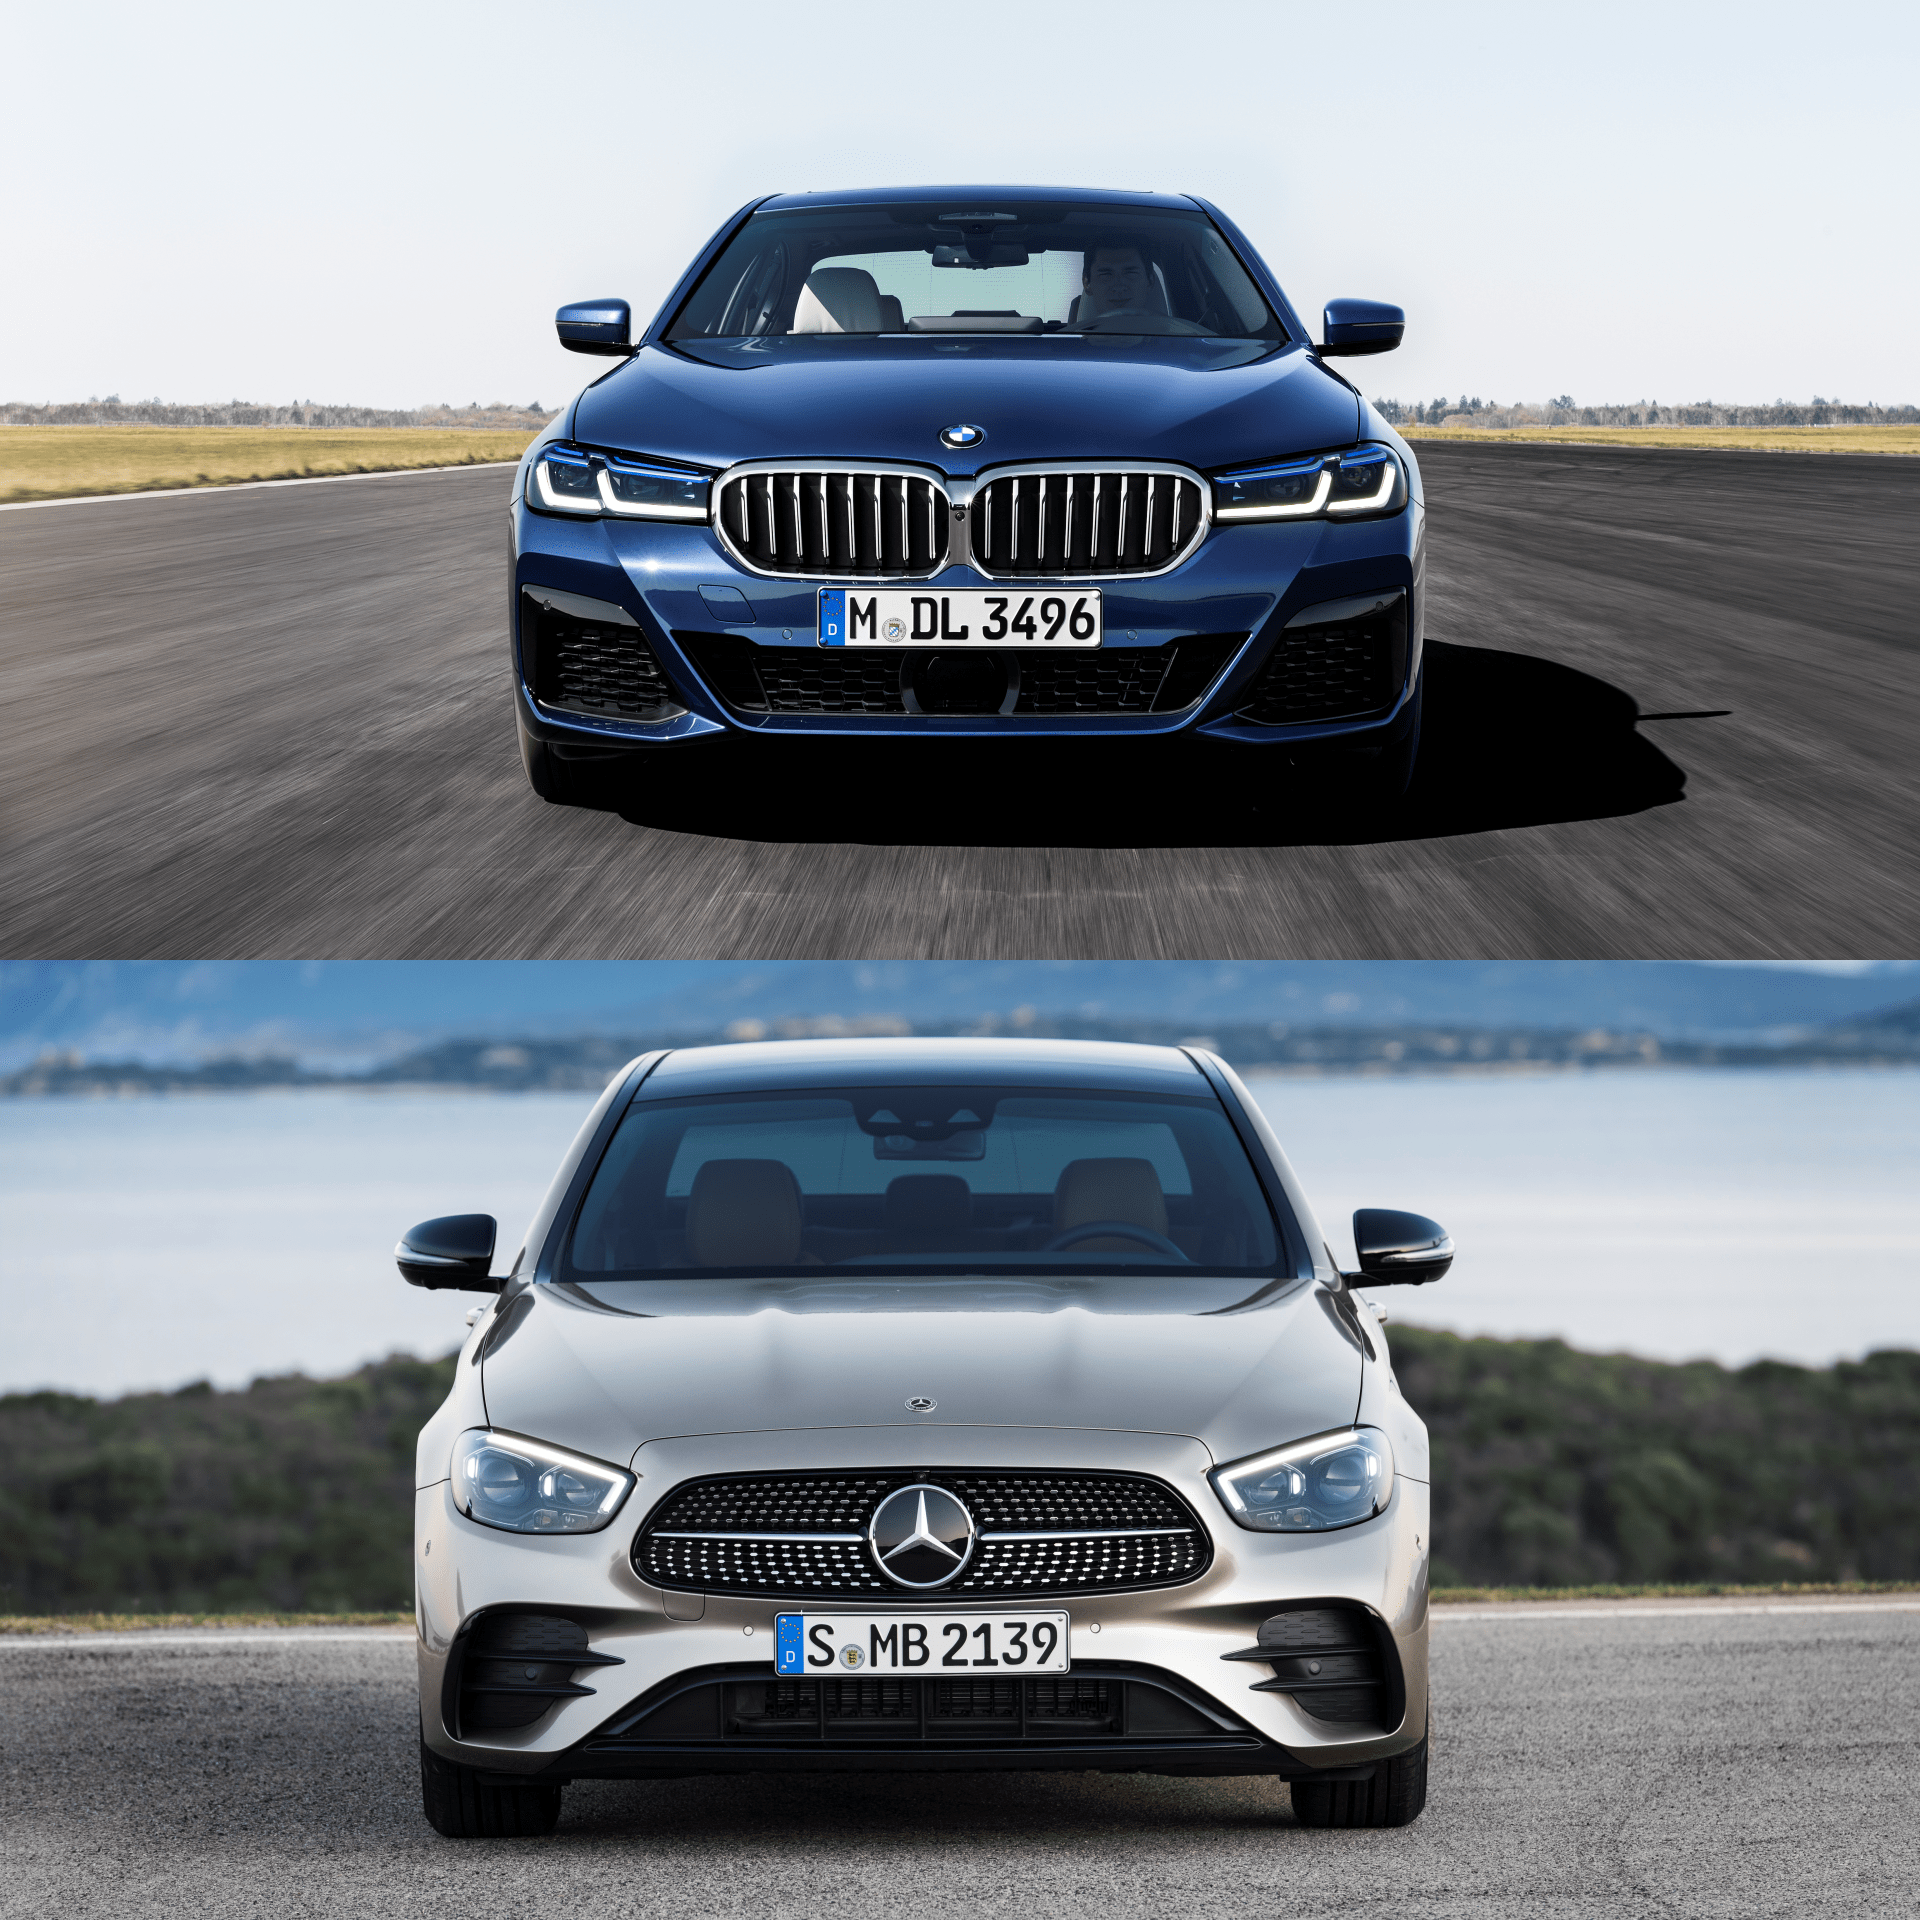 Which Is Cheaper To Maintain BMW or Mercedes?